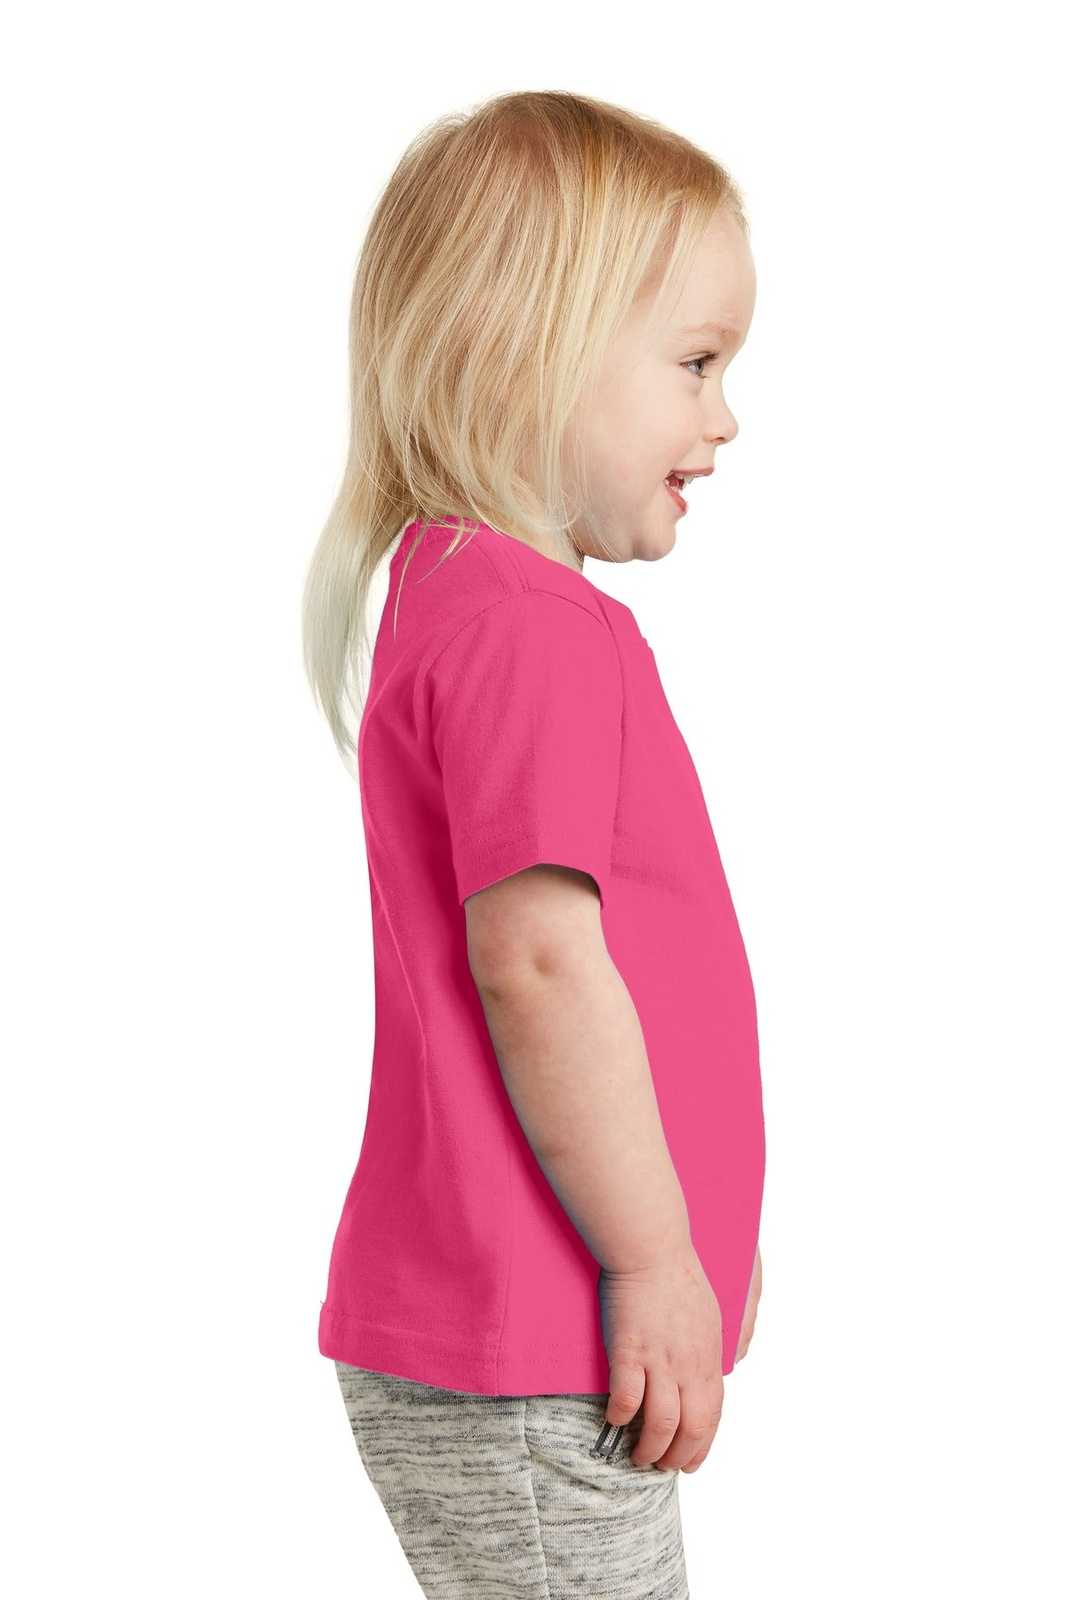 Rabbit Skins 3321 Toddler Fine Jersey Tee - Hot Pink - HIT a Double